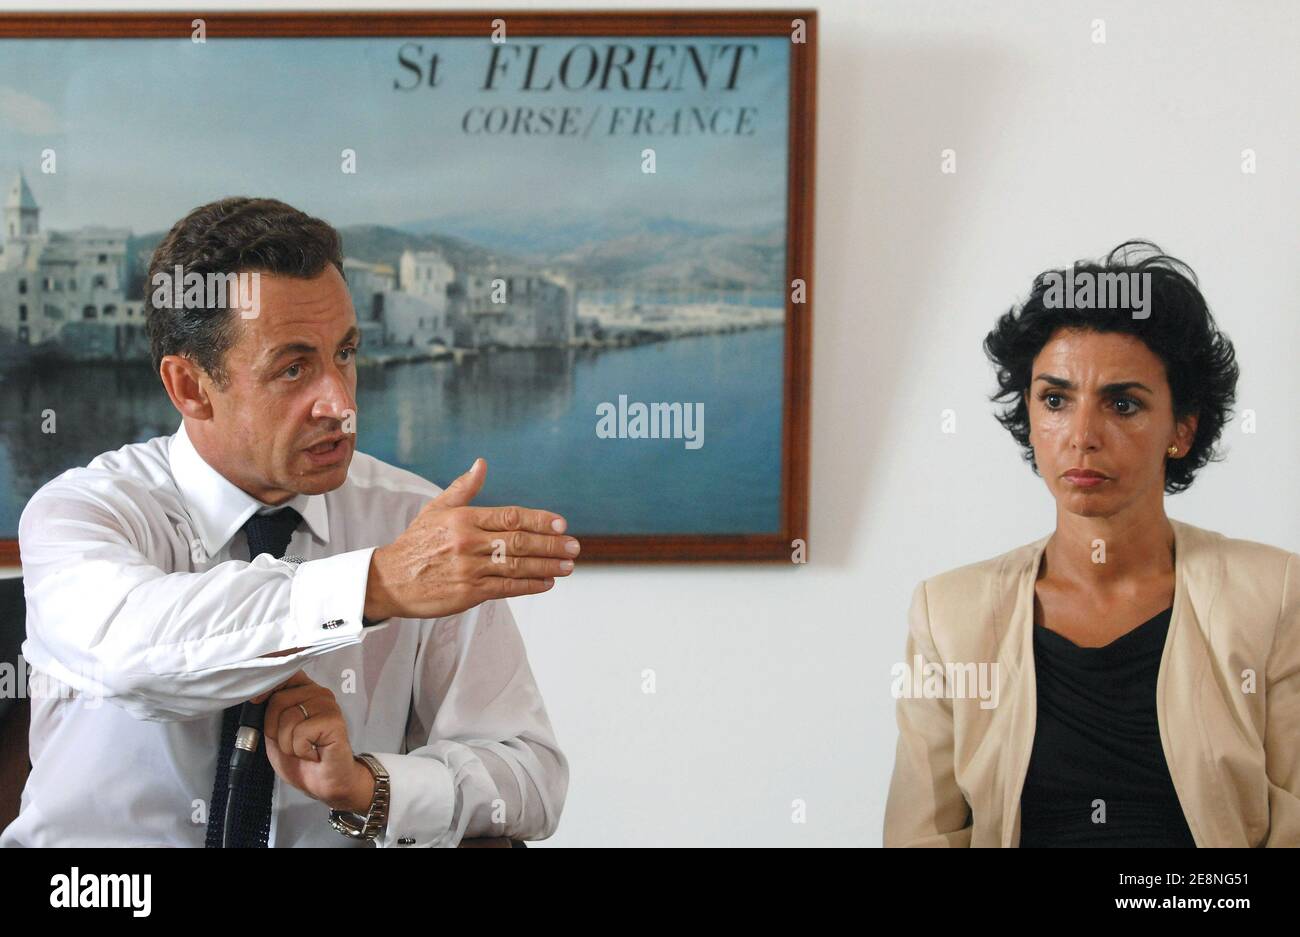 France's President Nicolas Sarkozy flanked by Justice minister Rachida Dati, holds a press conference about extortion threats at Saint-Florent during a one-day visit to the French Mediterranean island of Corsica France, on August 28, 2007. Benvenuti is a local restaurant owner who claims to have received extortion threats. Photo by Christophe Guibbbaud/ABACAPRESS.COM Stock Photo